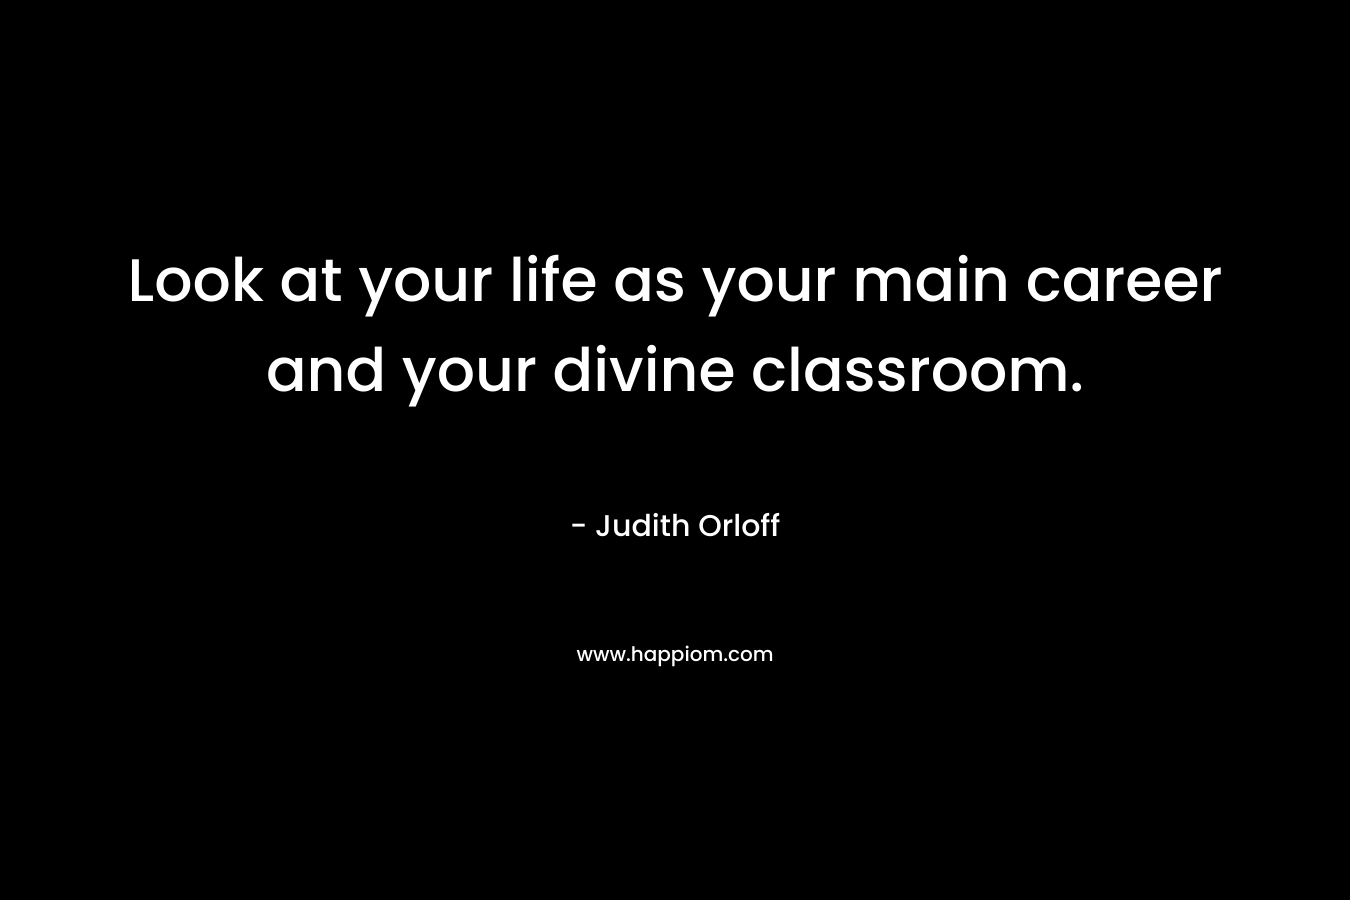 Look at your life as your main career and your divine classroom.